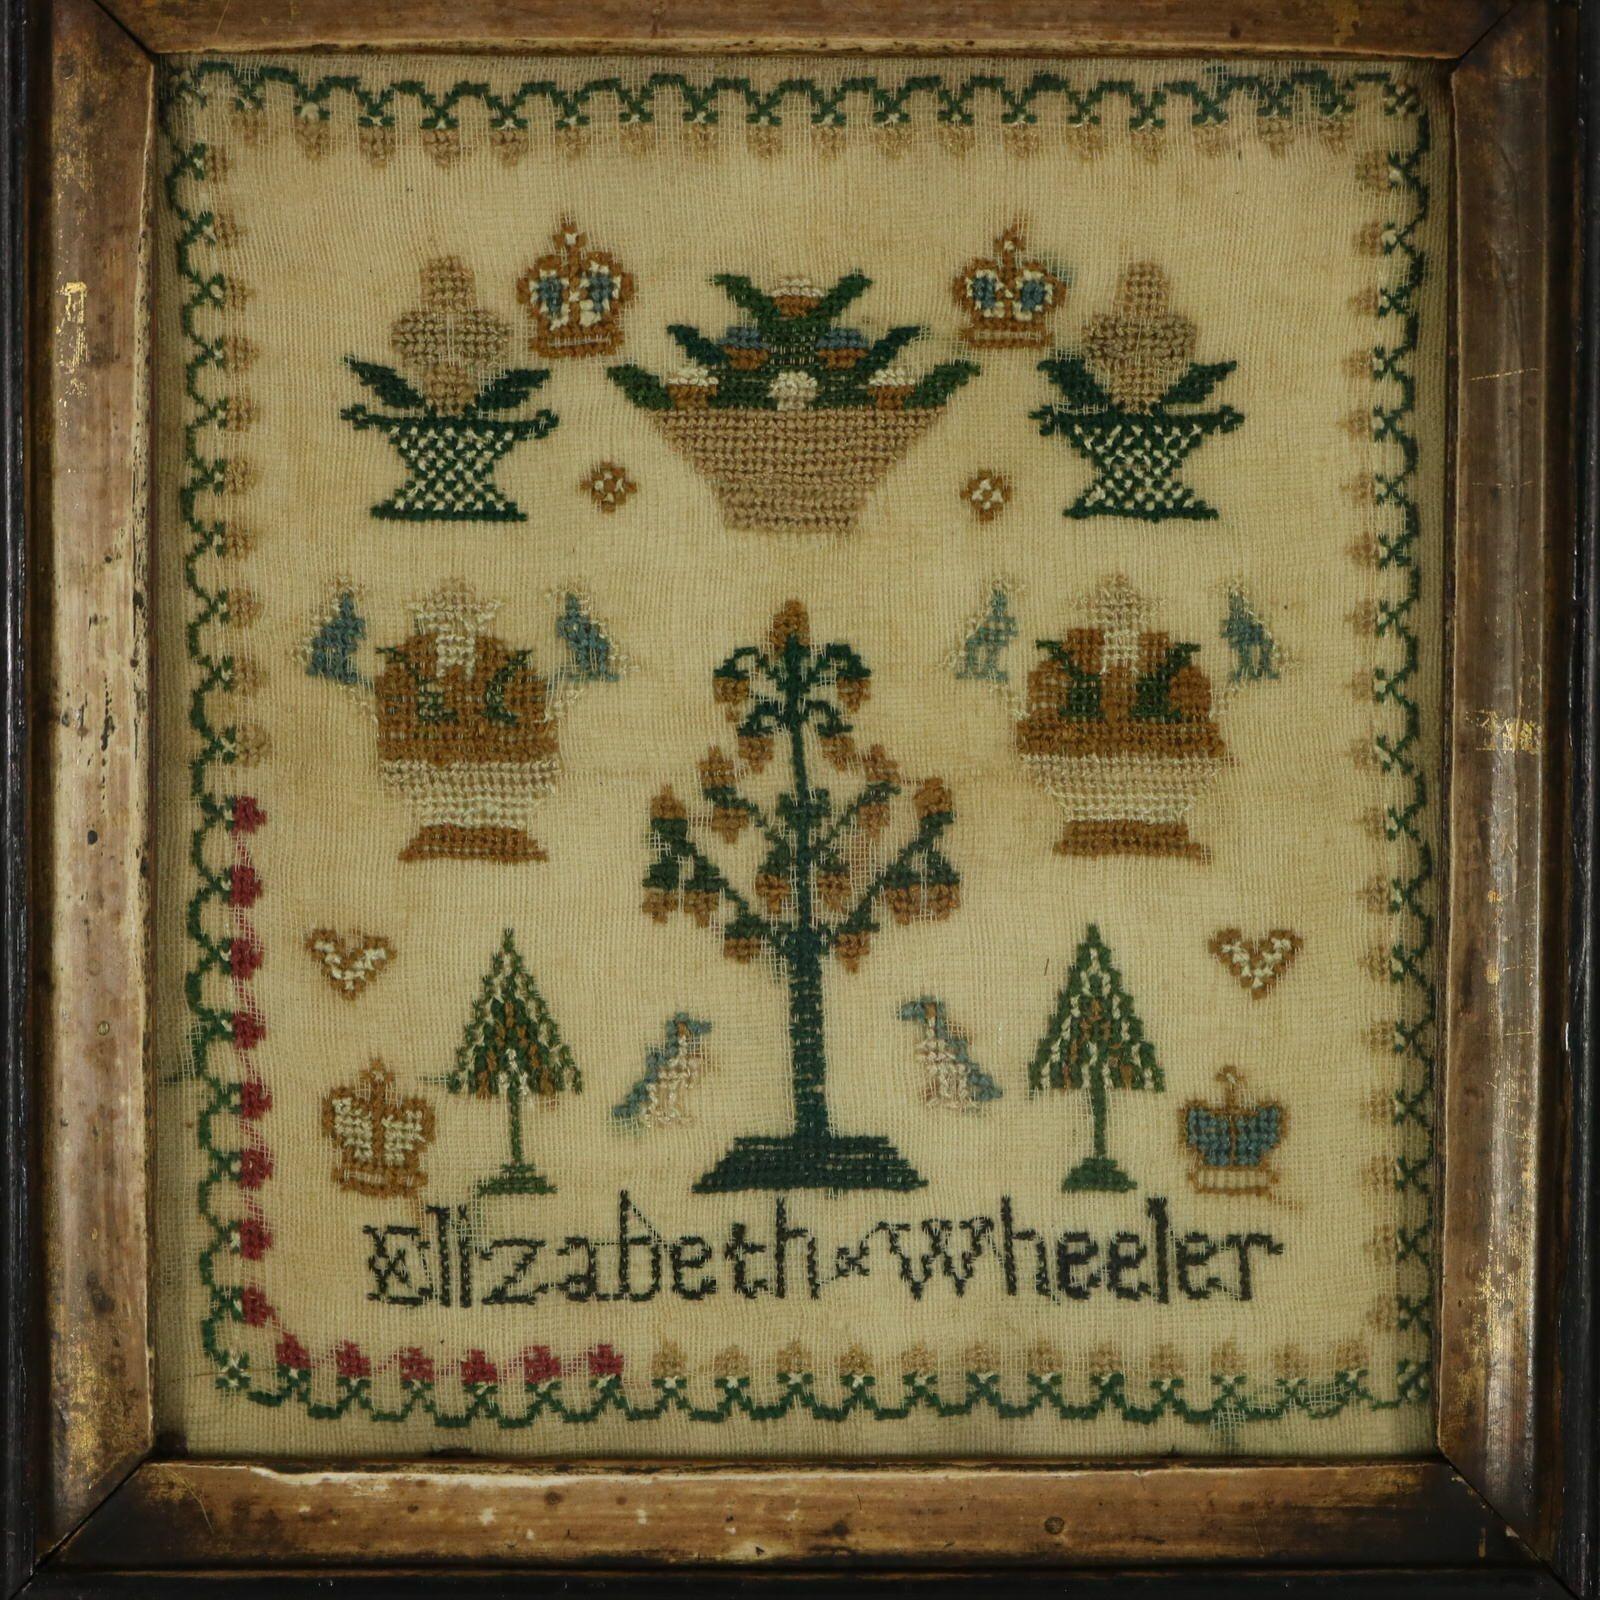 Georgian Miniature Sampler, by Elizabeth Wheeler. The sampler is worked in silk threads on a linen ground, in cross stitch. Meandering strawberry border. Colours green, light brown, silver, red and blue. Signed 'Elizabeth Wheeler'. A wonderful set